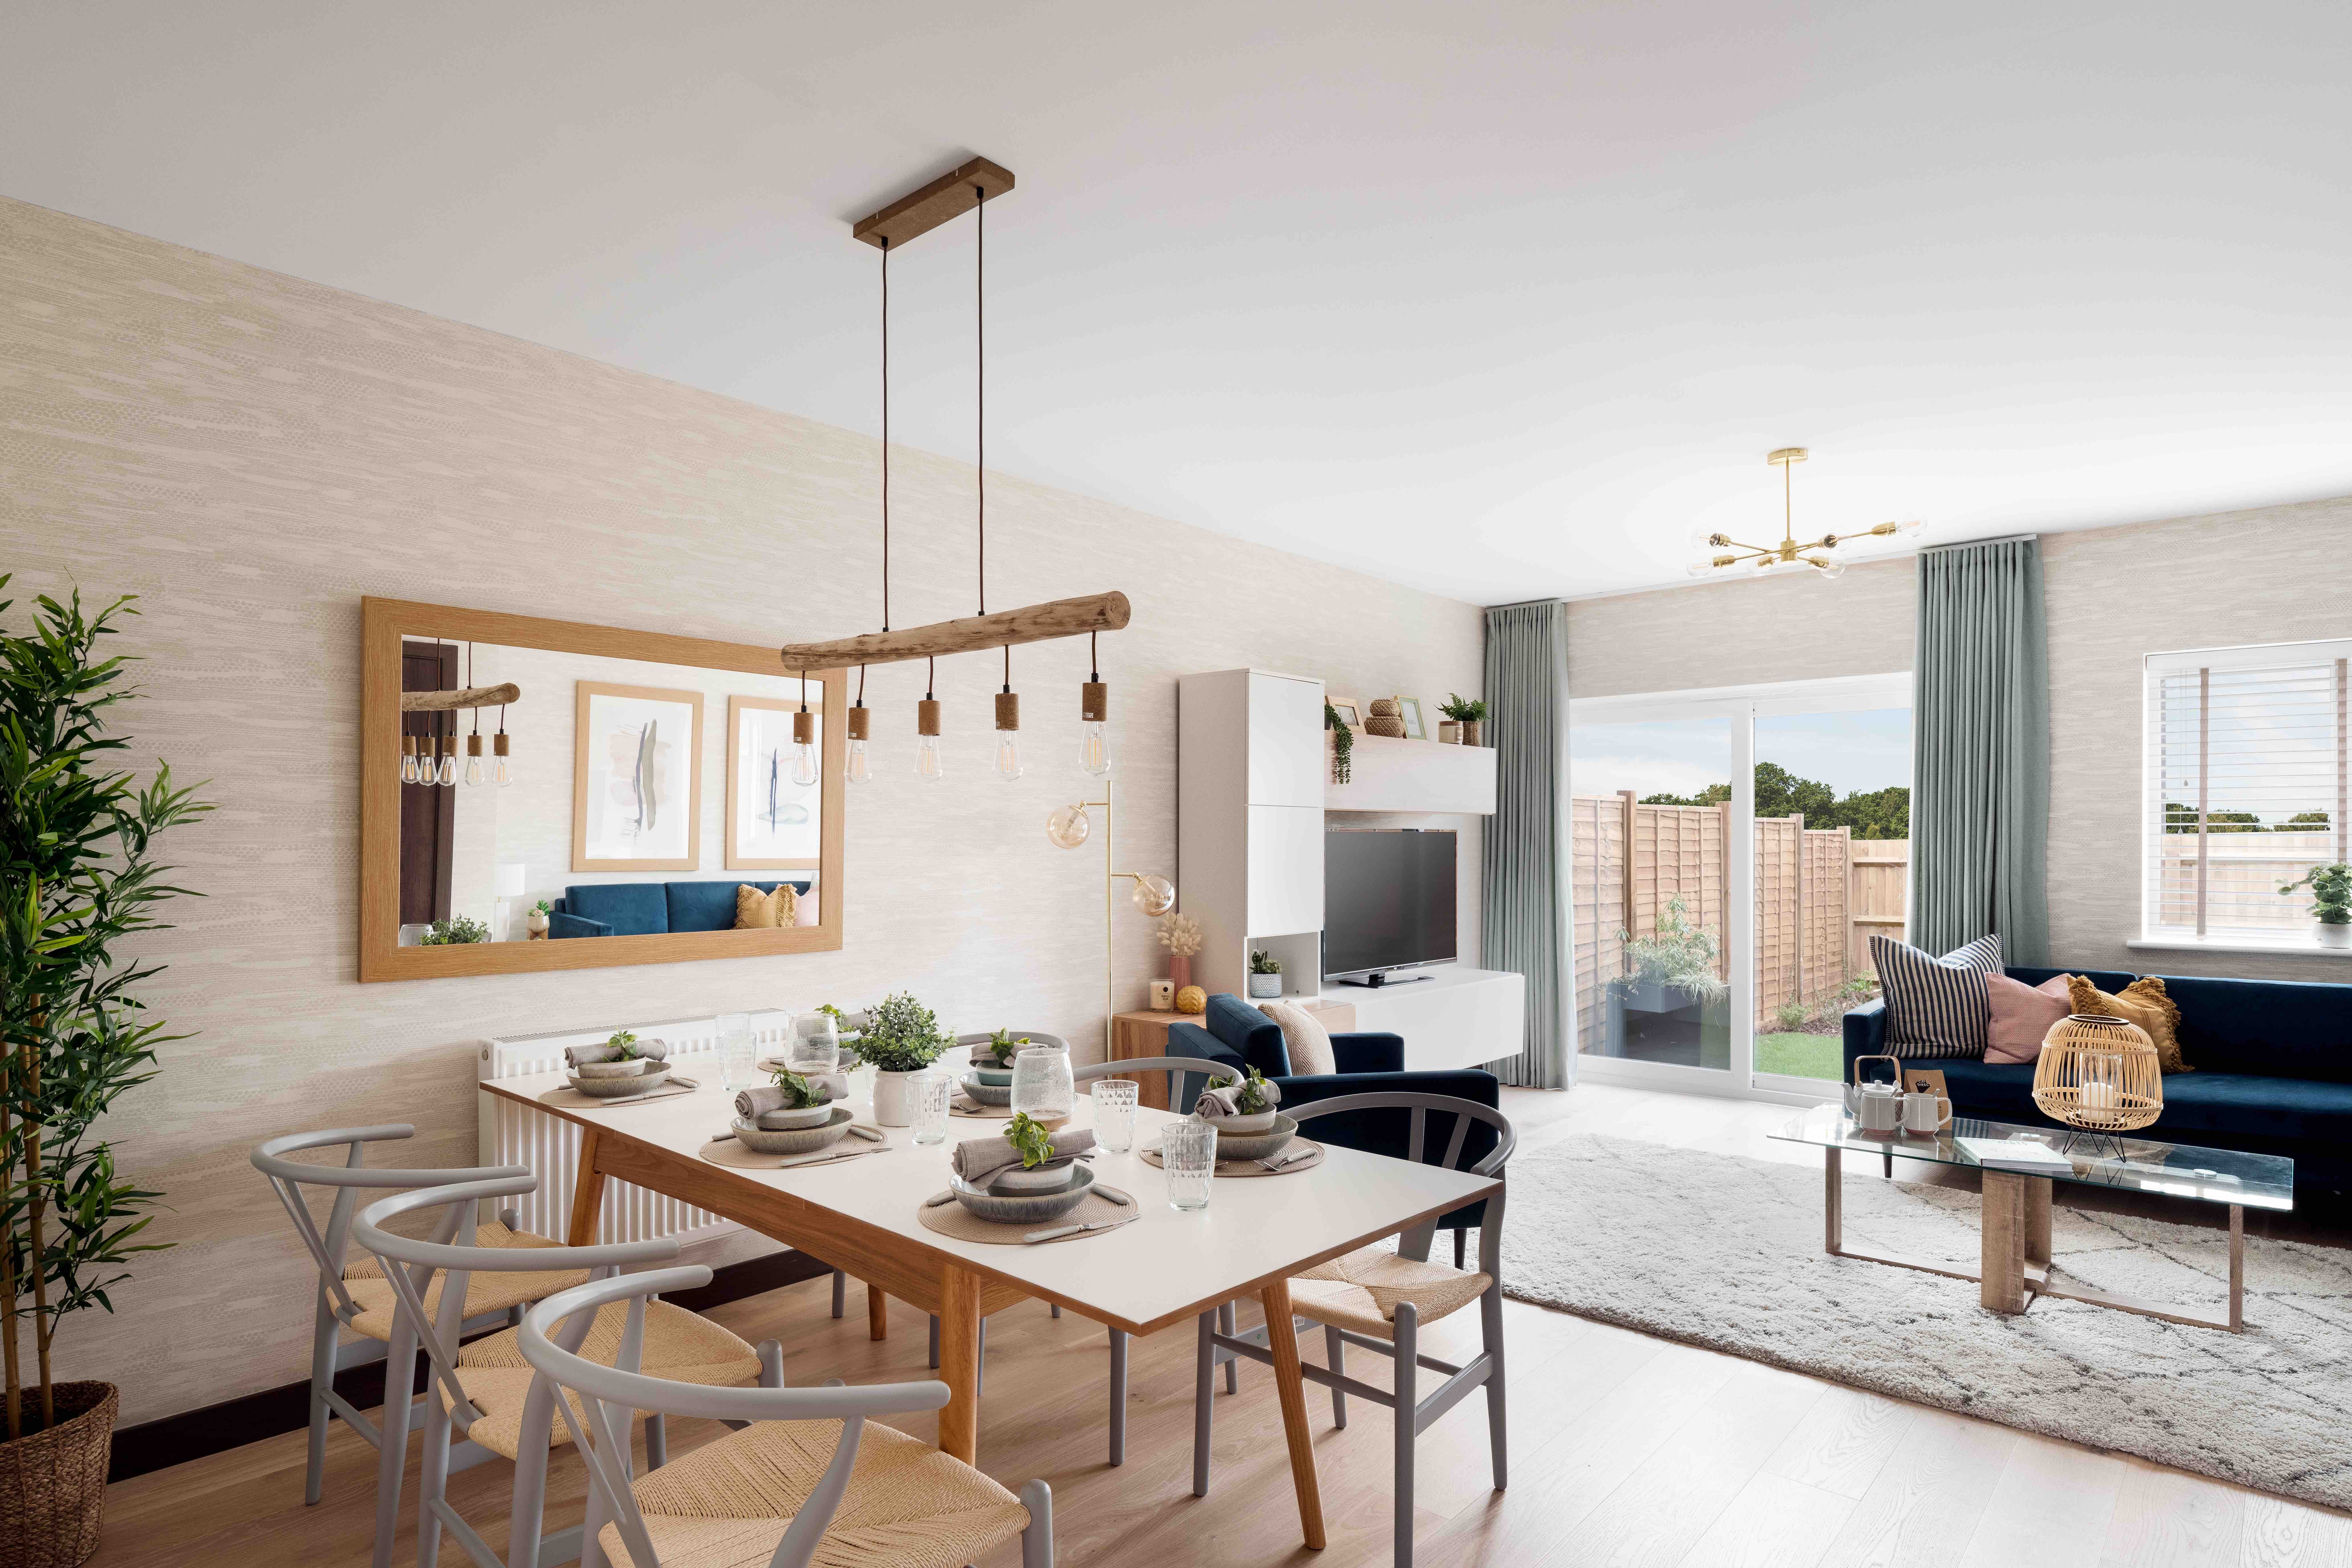 Move fast to buy one of the last remaining apartments at the stunning Tayfields development image